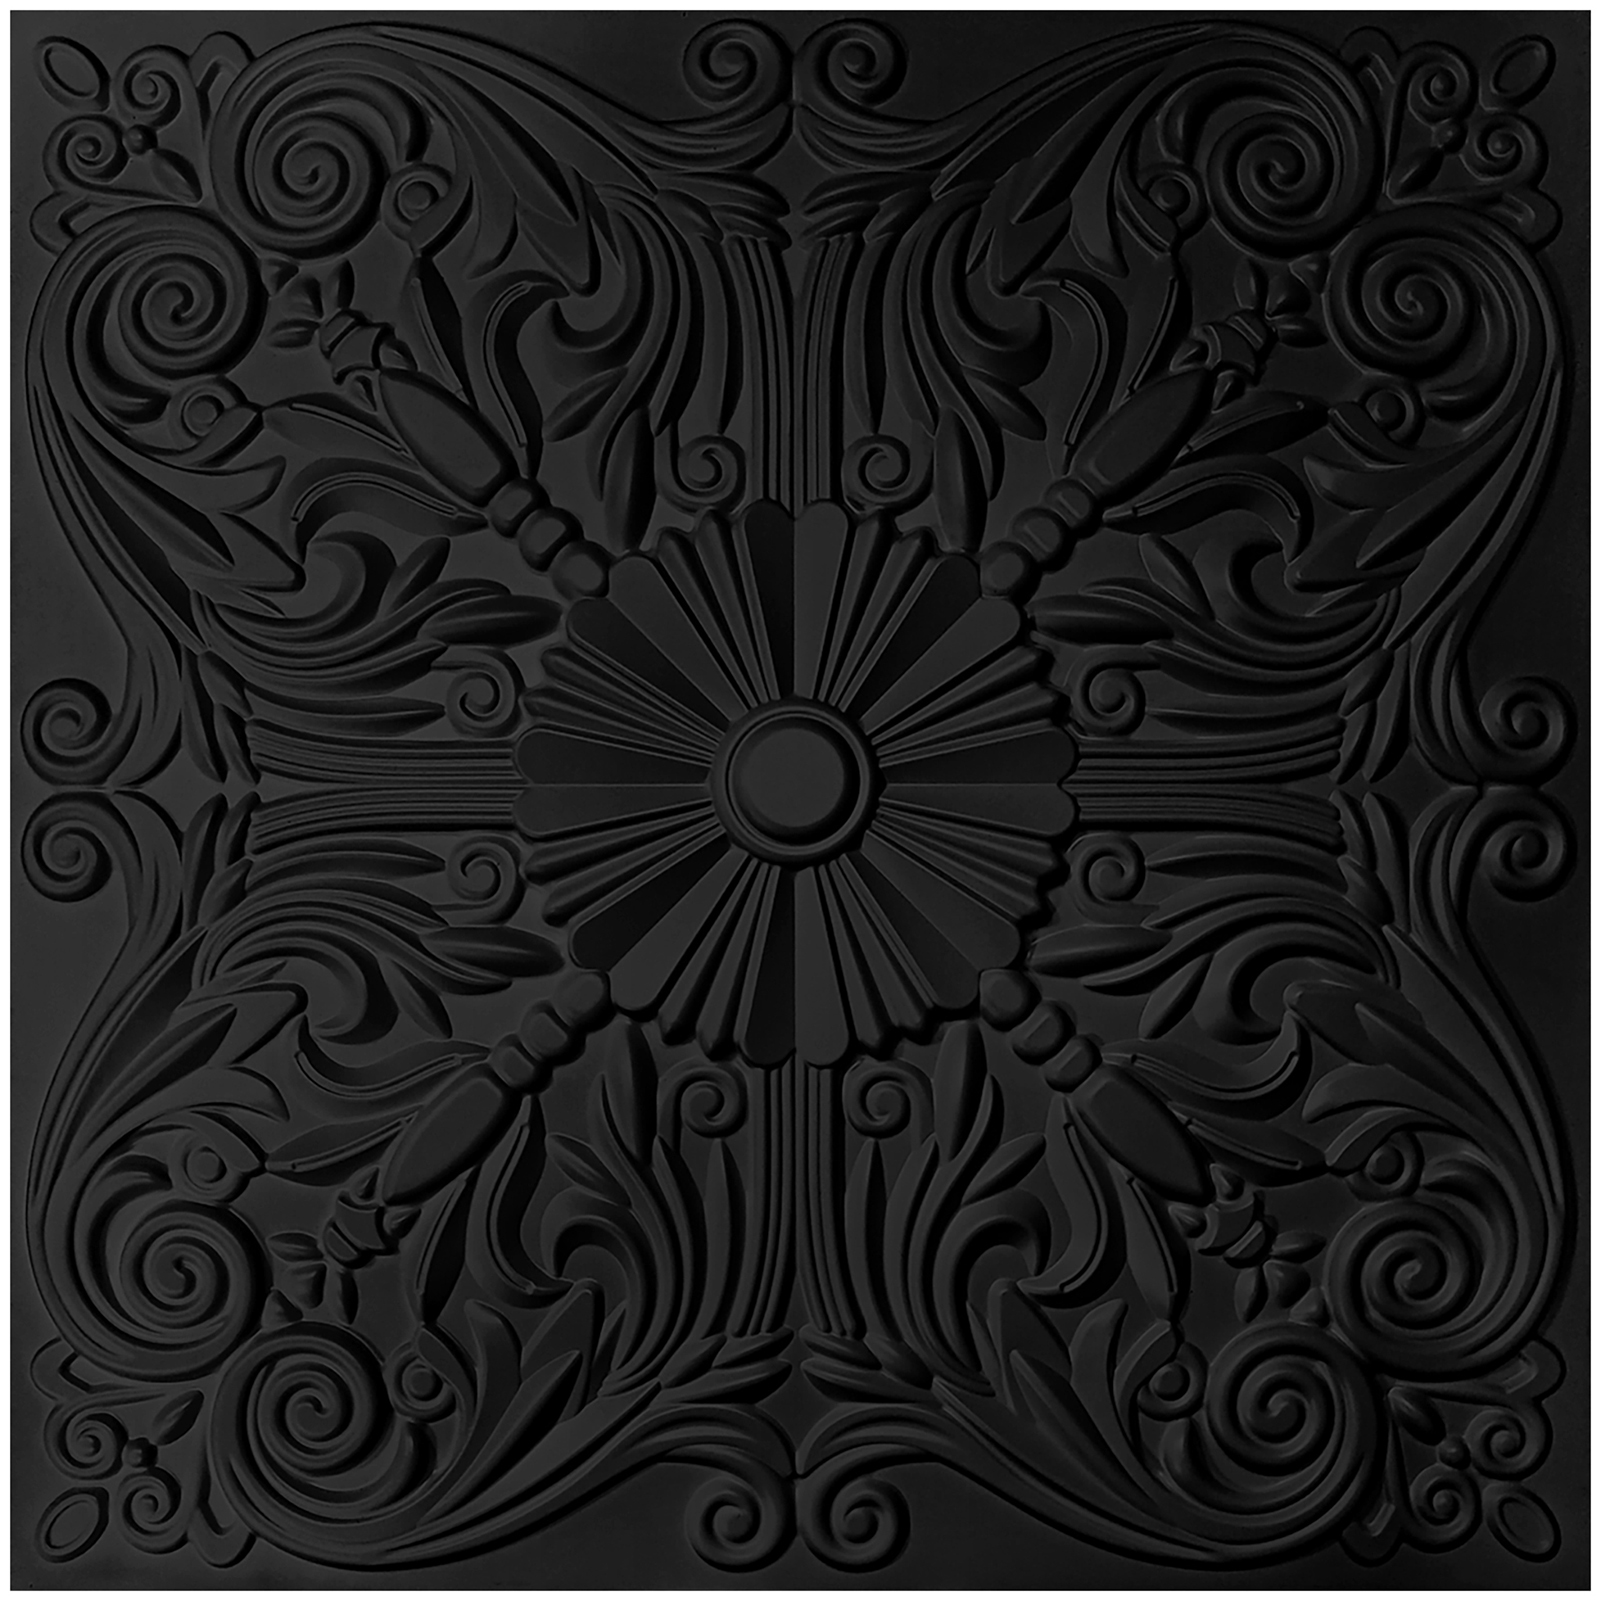 A10904P12 -Decorative Ceiling Tile 2x2 Glue up, Lay in Ceiling Tile 24x24 Pack of 12pcs Spanish Floral in Matt White